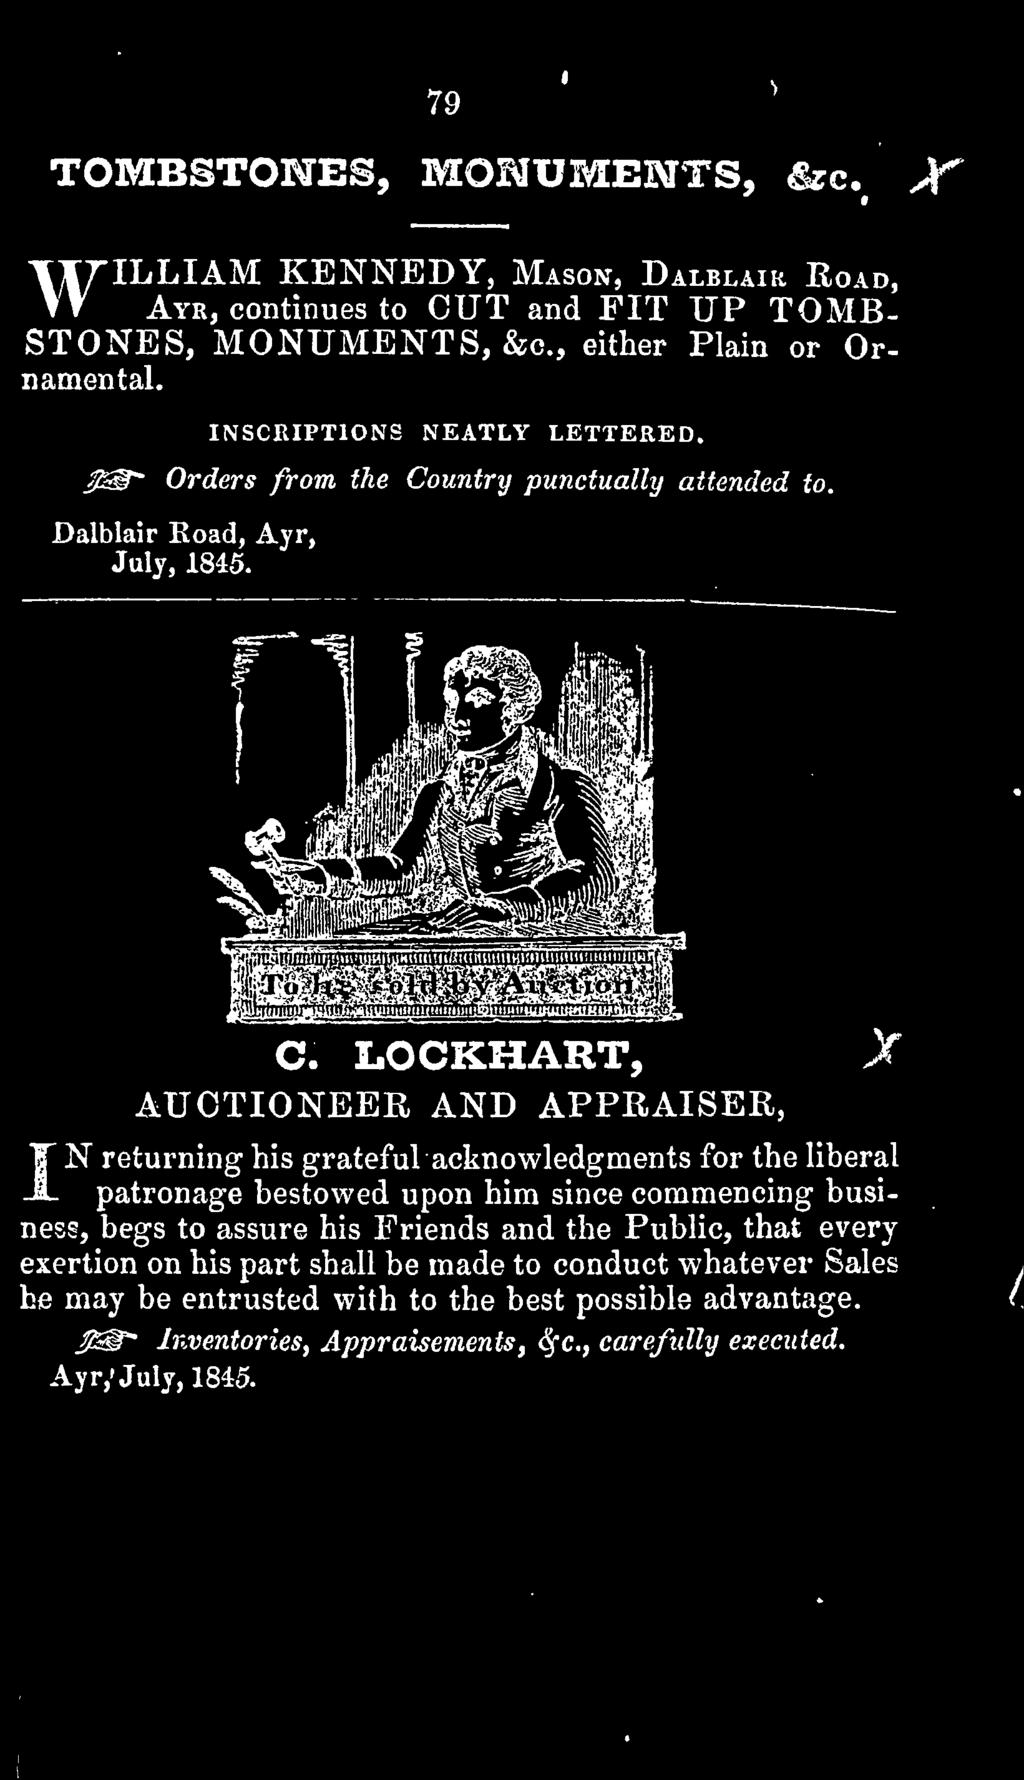 LOCKHART, J AUCTIONEER AND APPRAISER, returning his grateful acknowledgments for the liberal IN patronage